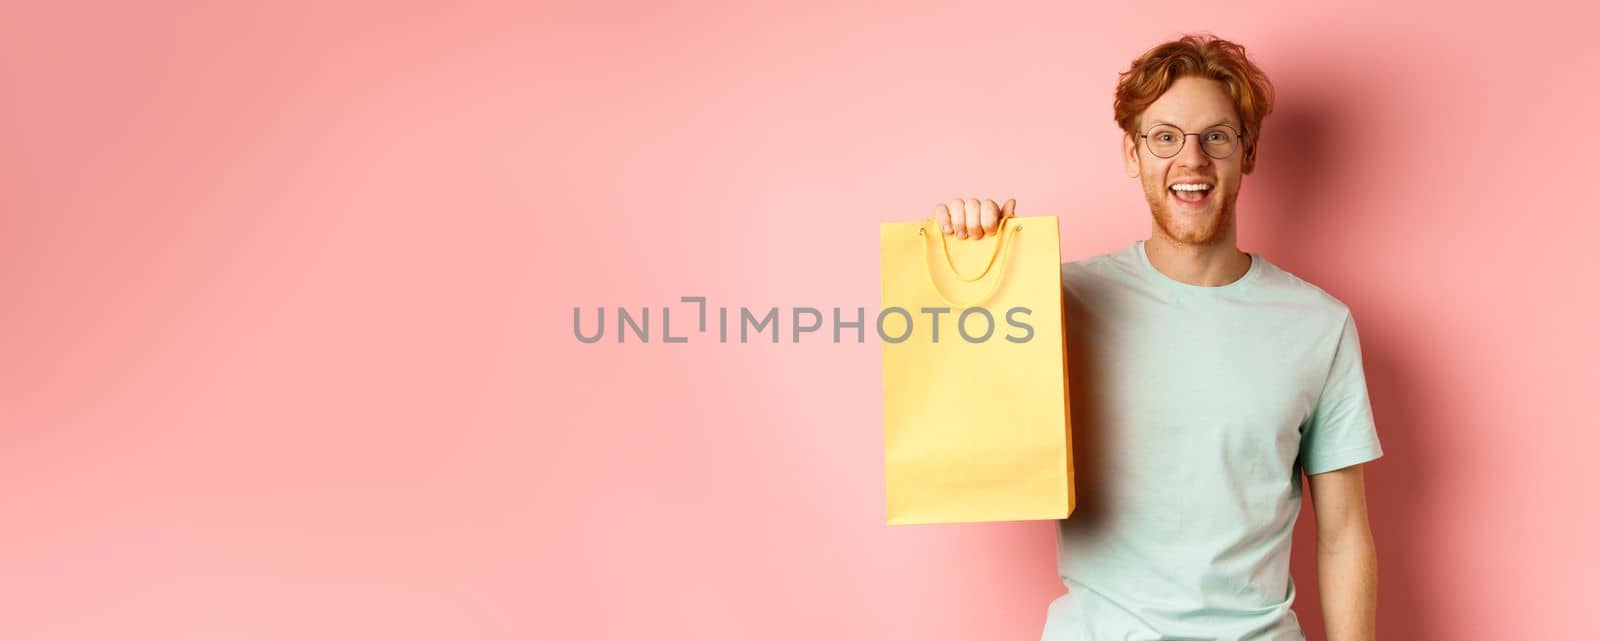 Cheerful redhead man in t-shirt, showing shopping bag and smiling, standing over pink background.